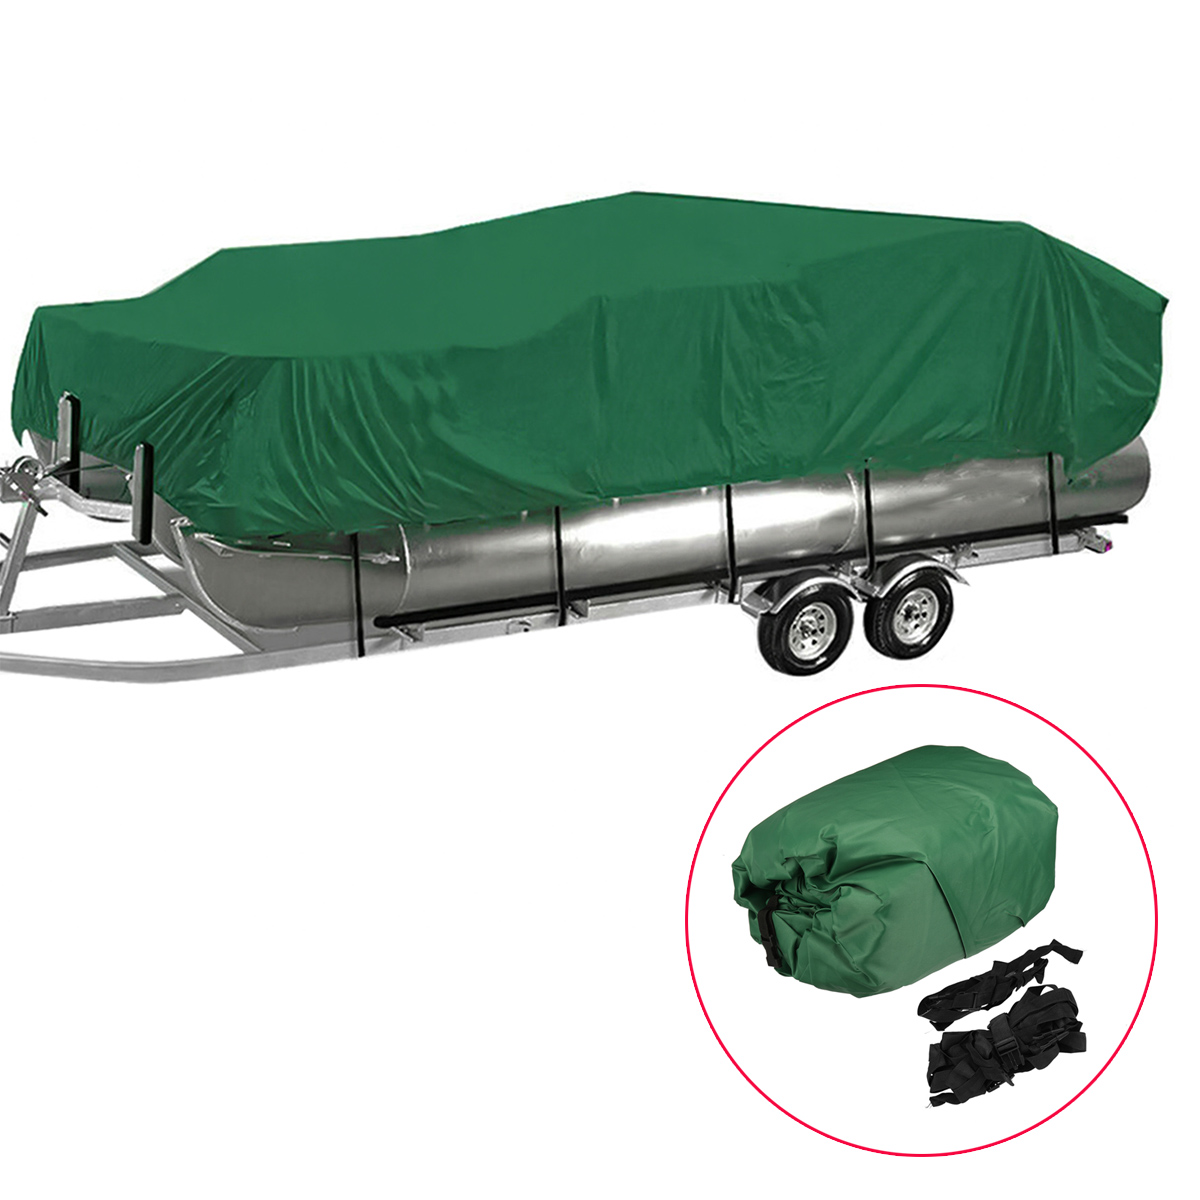 17-20Ft / 21-24Ft 210D Pontoon Heavy Duty Cover Sun Protection Waterproof Dustproof Trailerable Fabric for Boat